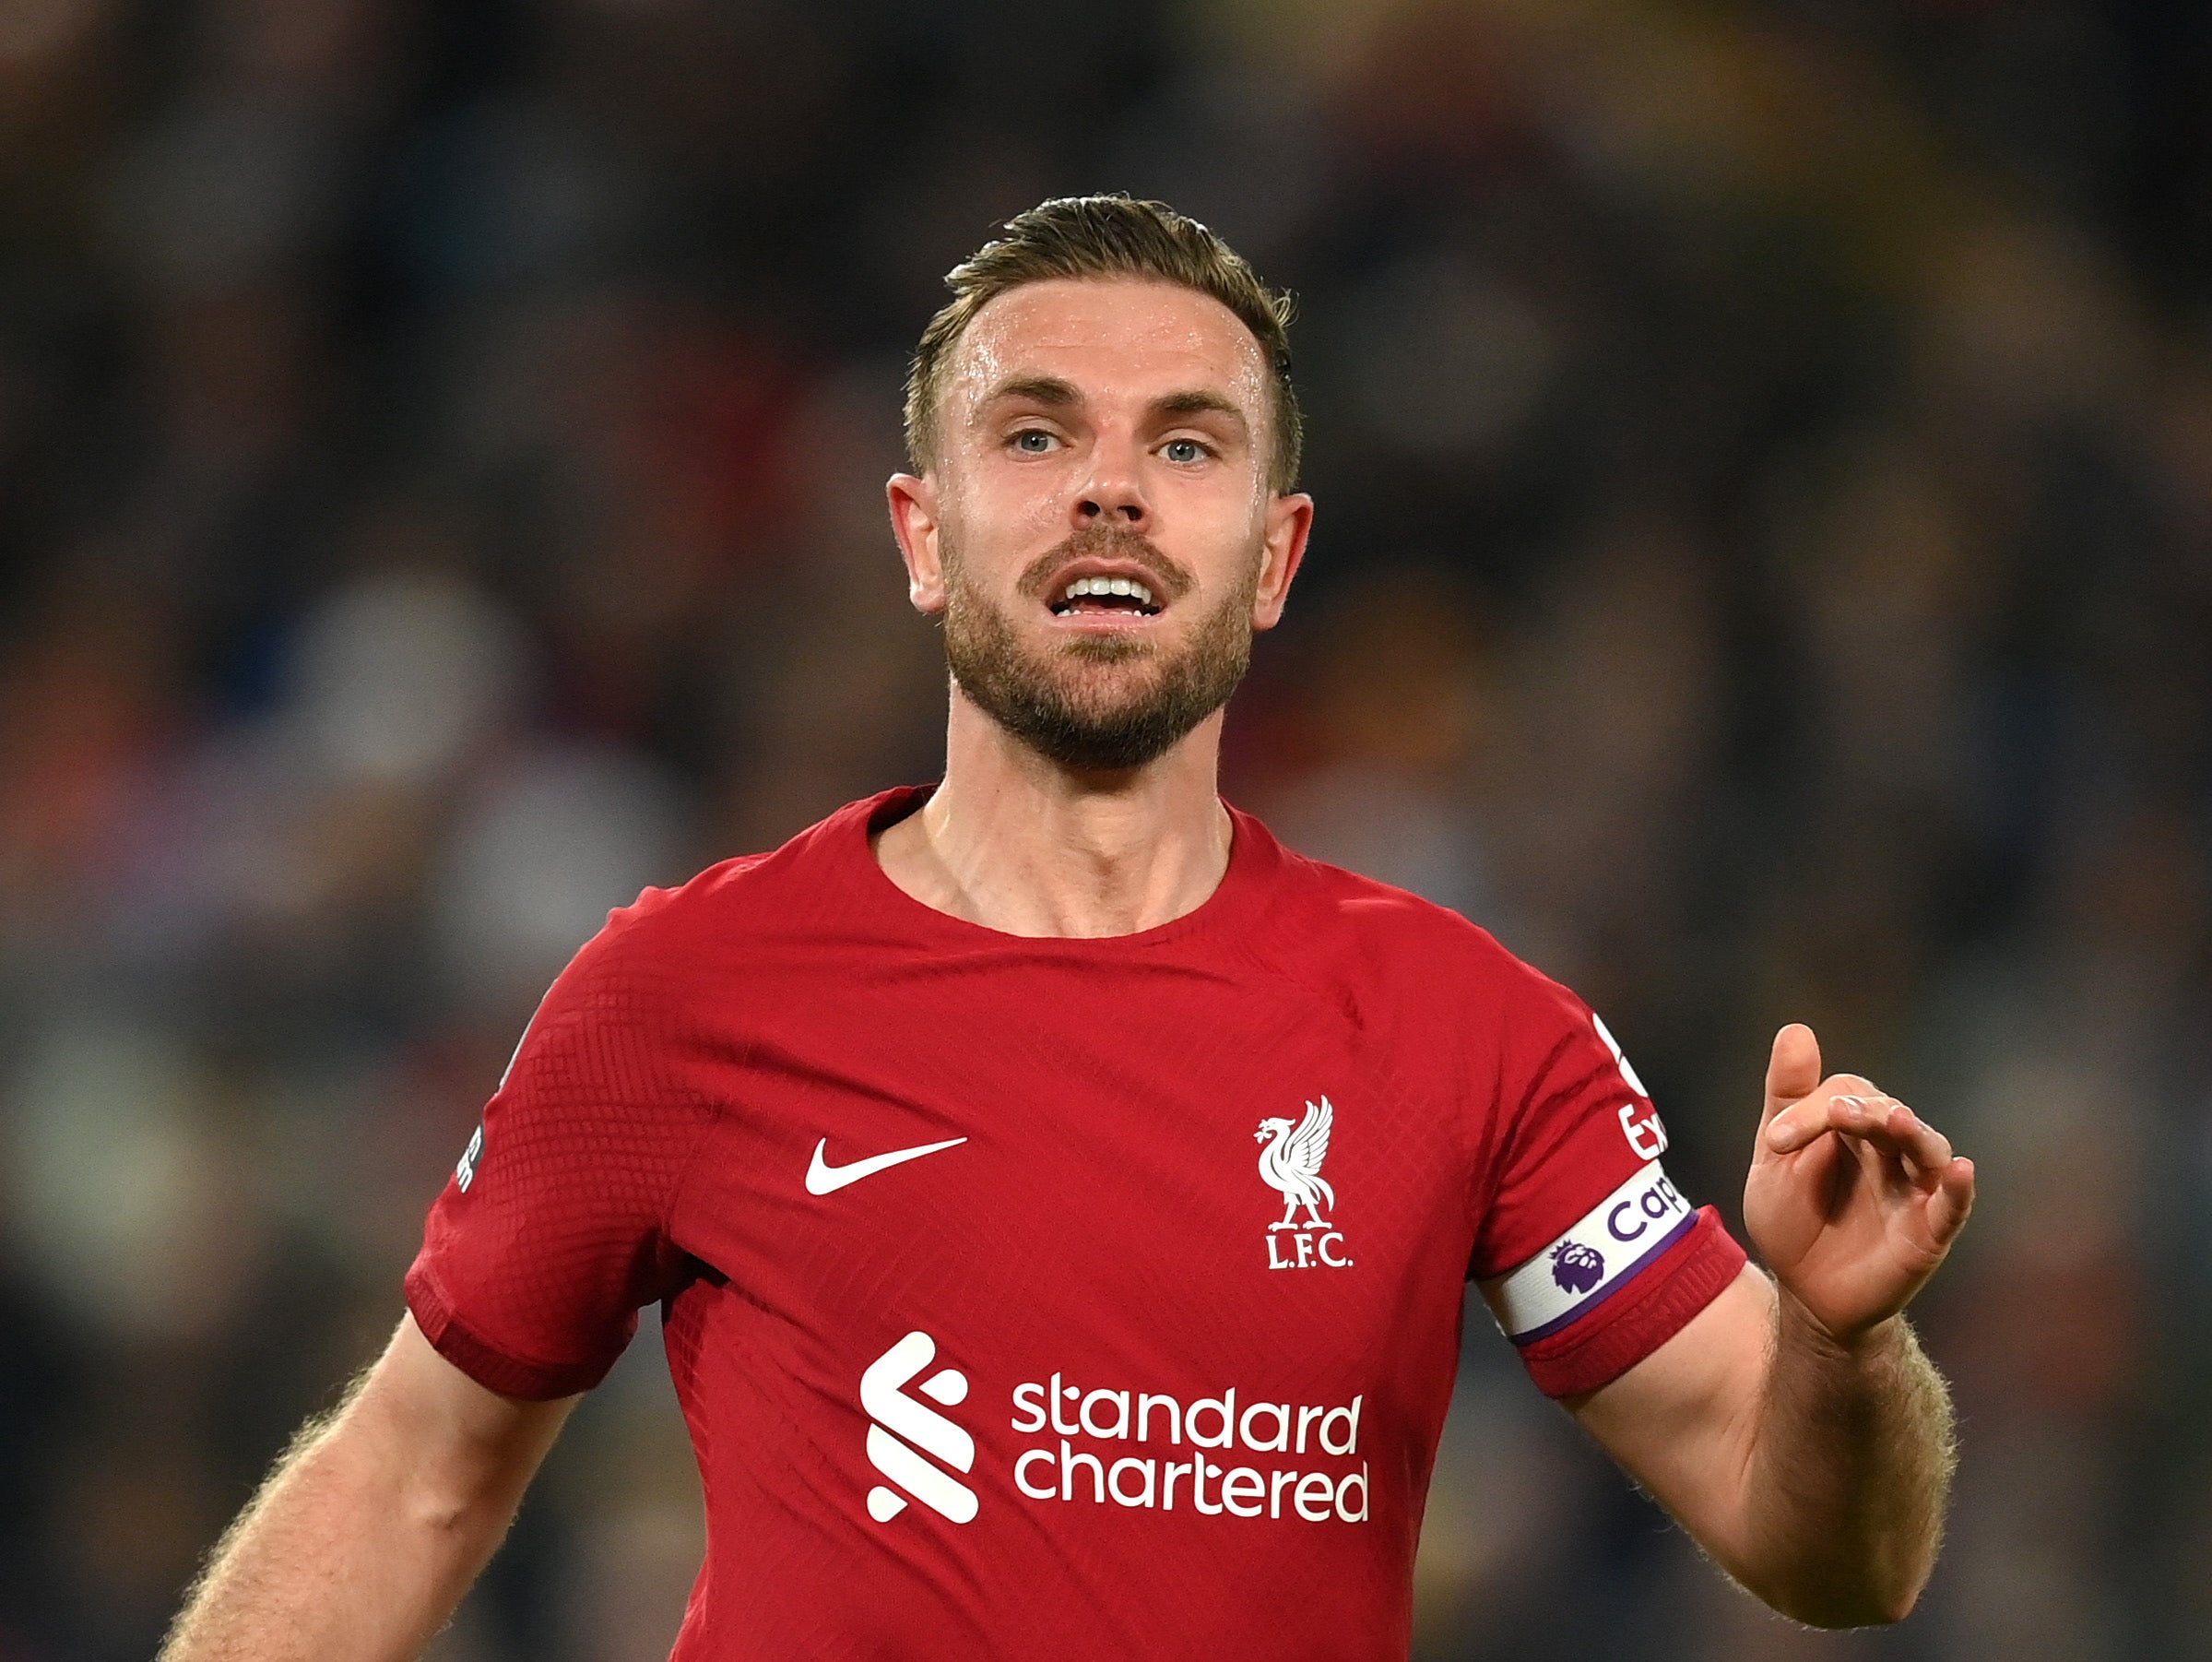 Jordan Henderson risks tarnishing Liverpool legacy after career built on  triumph of character | The Independent